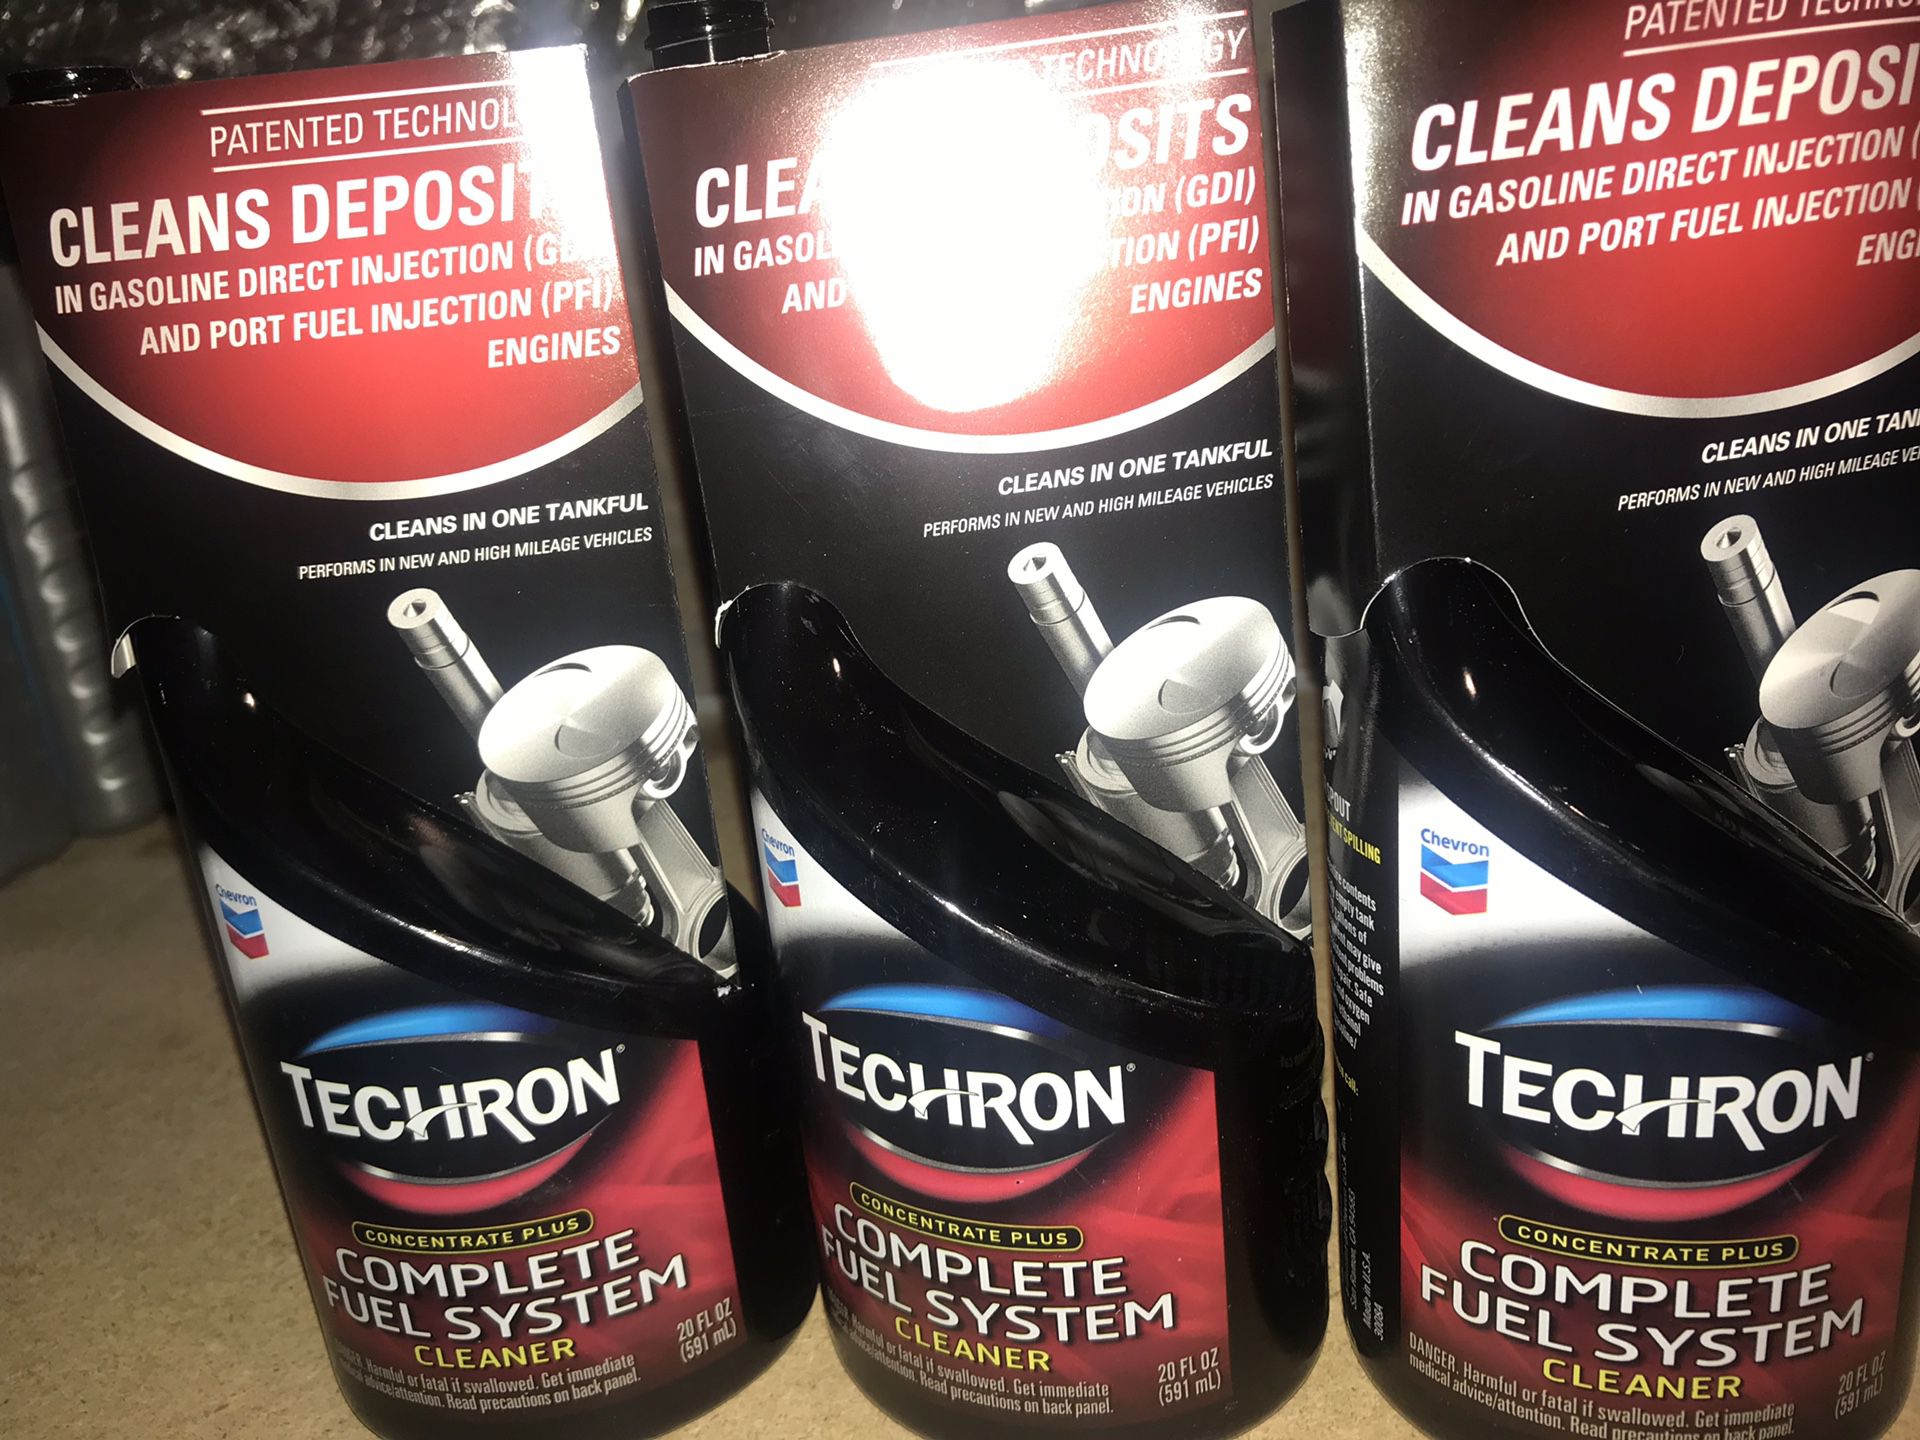 TechRon complete fuel system cleaner